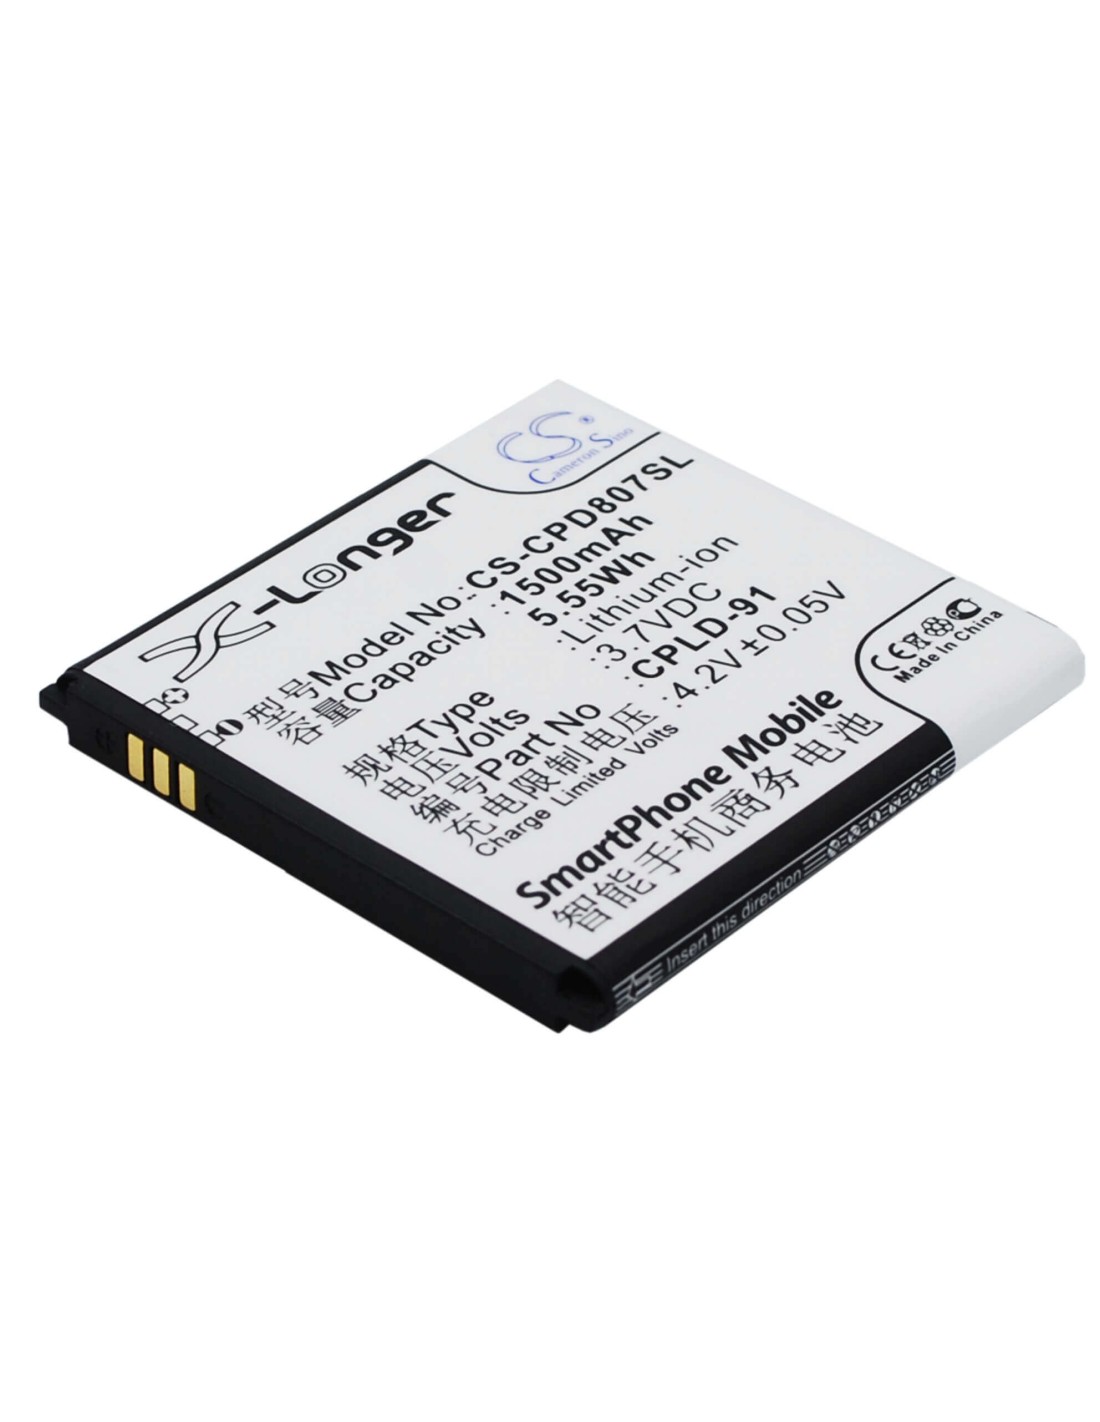 Battery for Coolpad 8070, 8028 3.7V, 1500mAh - 5.55Wh